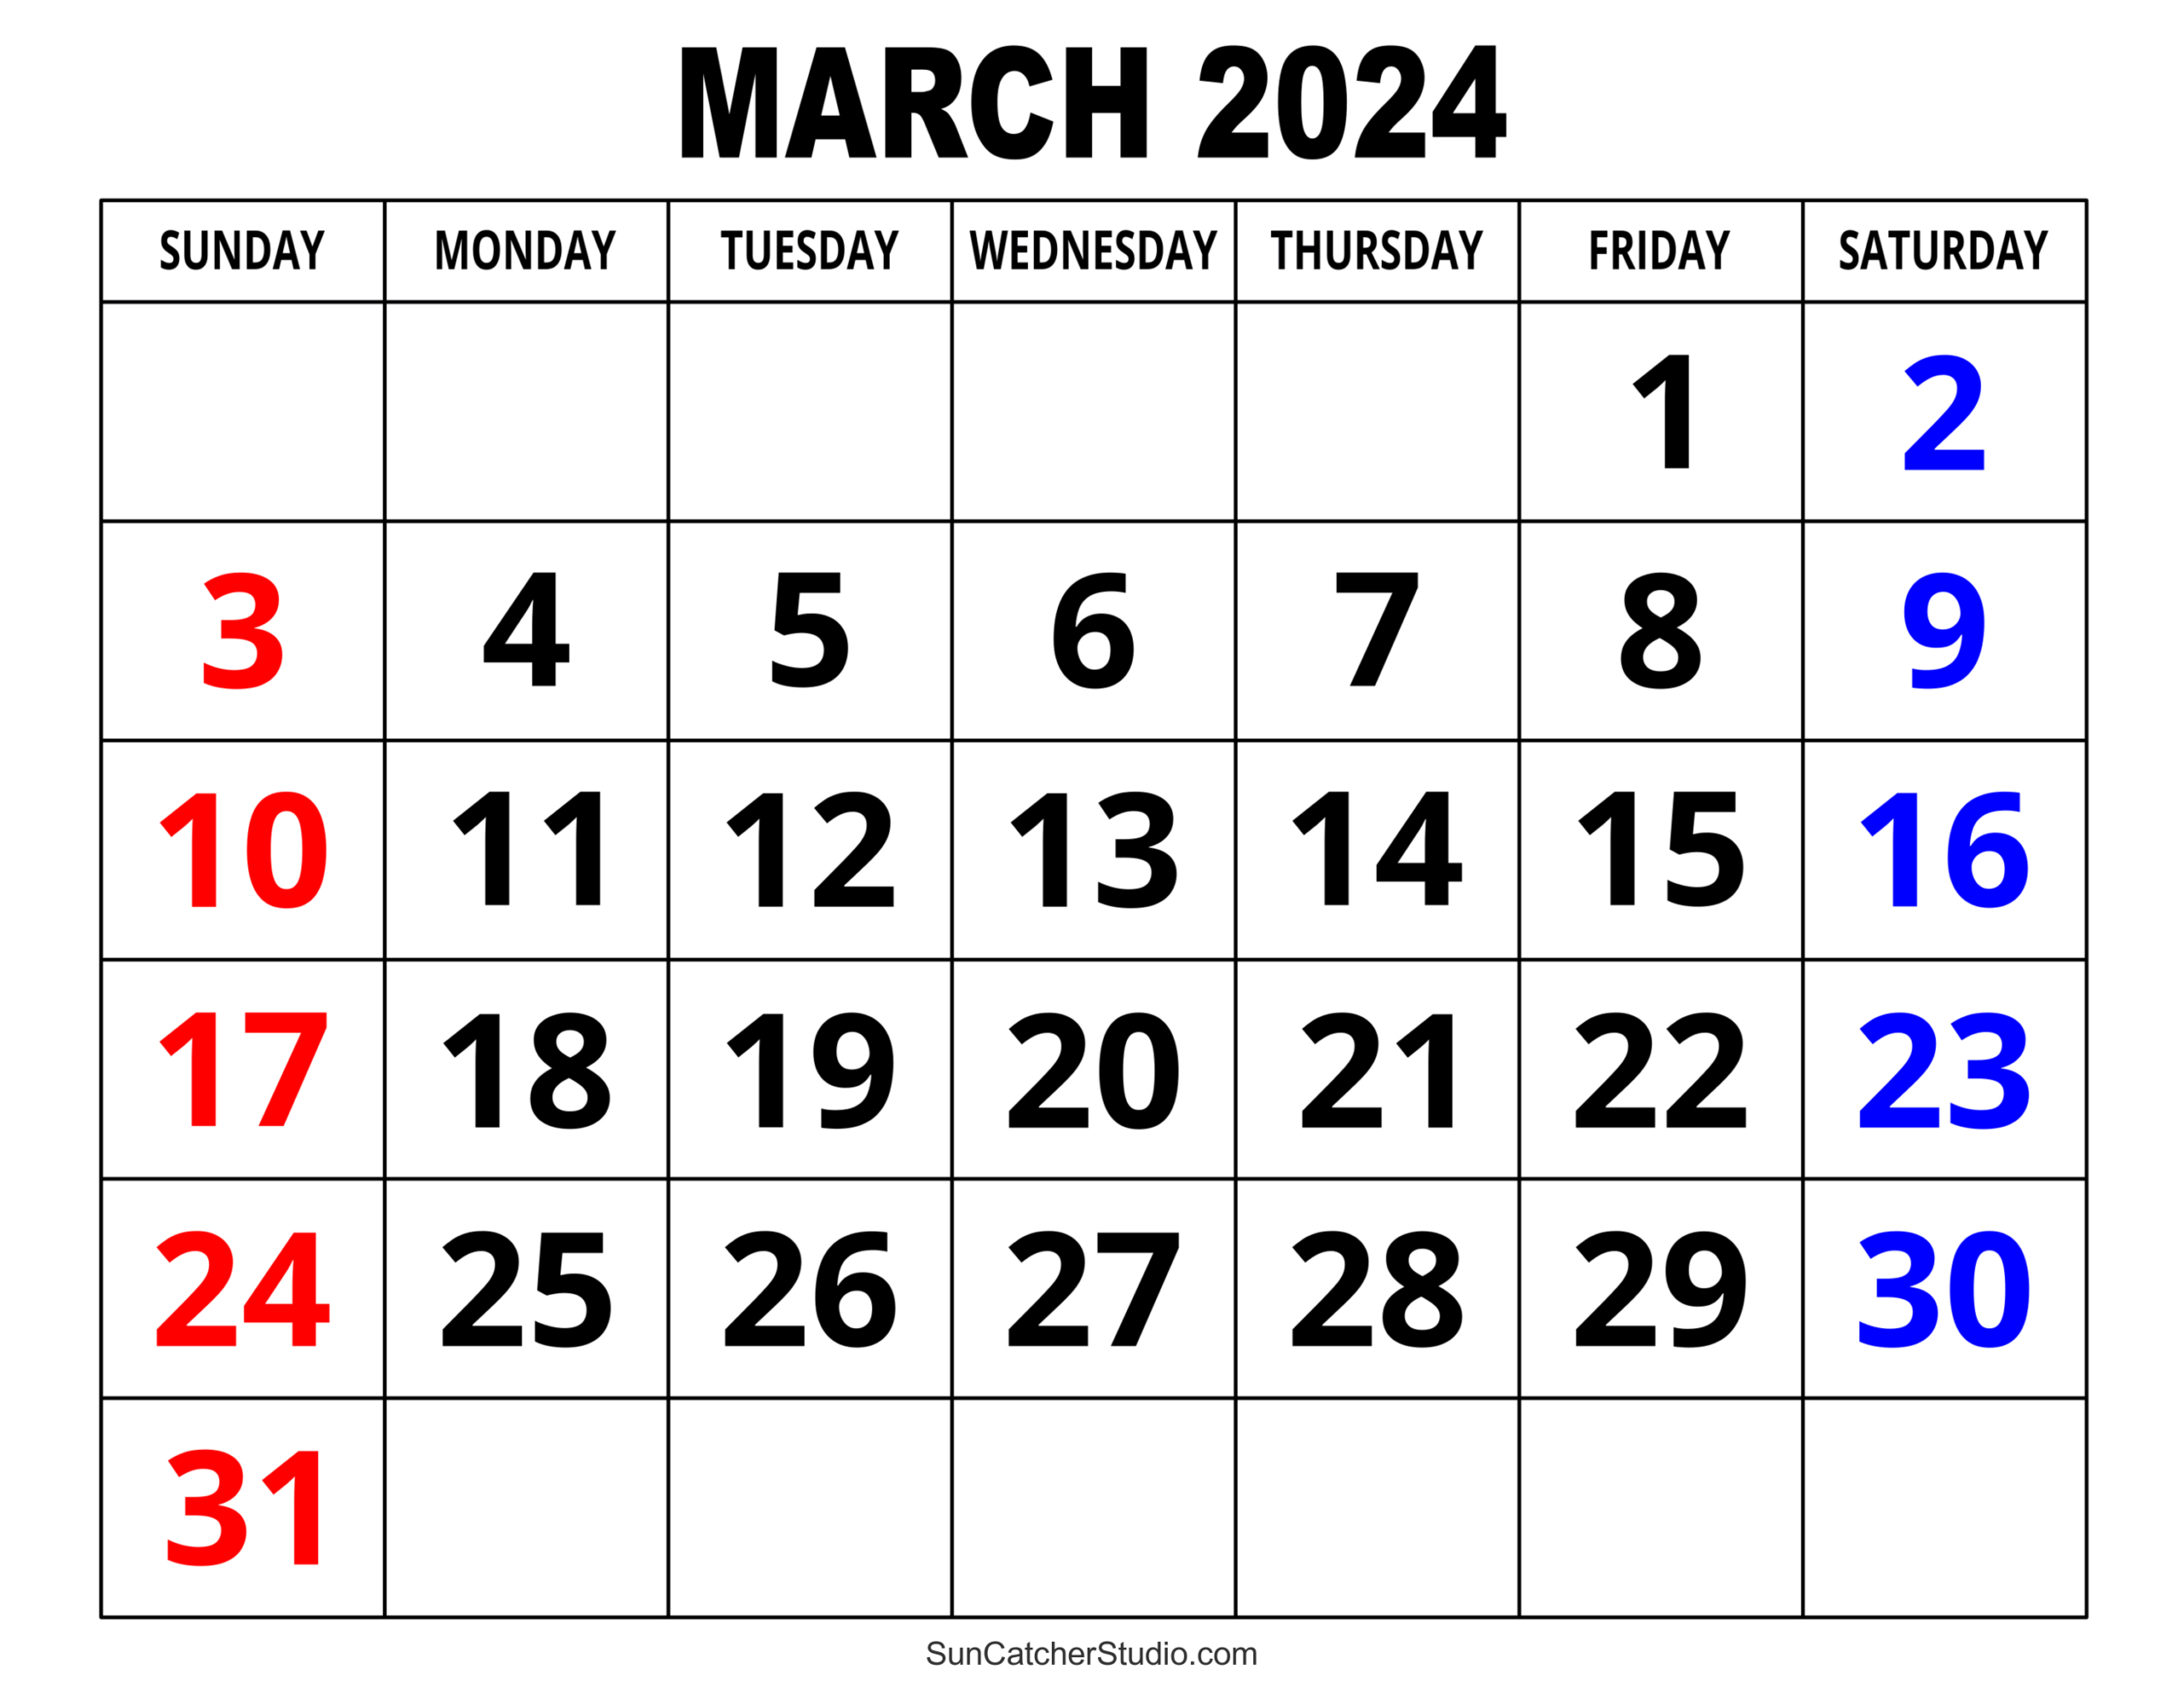 March 2024 Calendar (Free Printable) – Diy Projects, Patterns | Free Printable Calendar 2024 Large Print